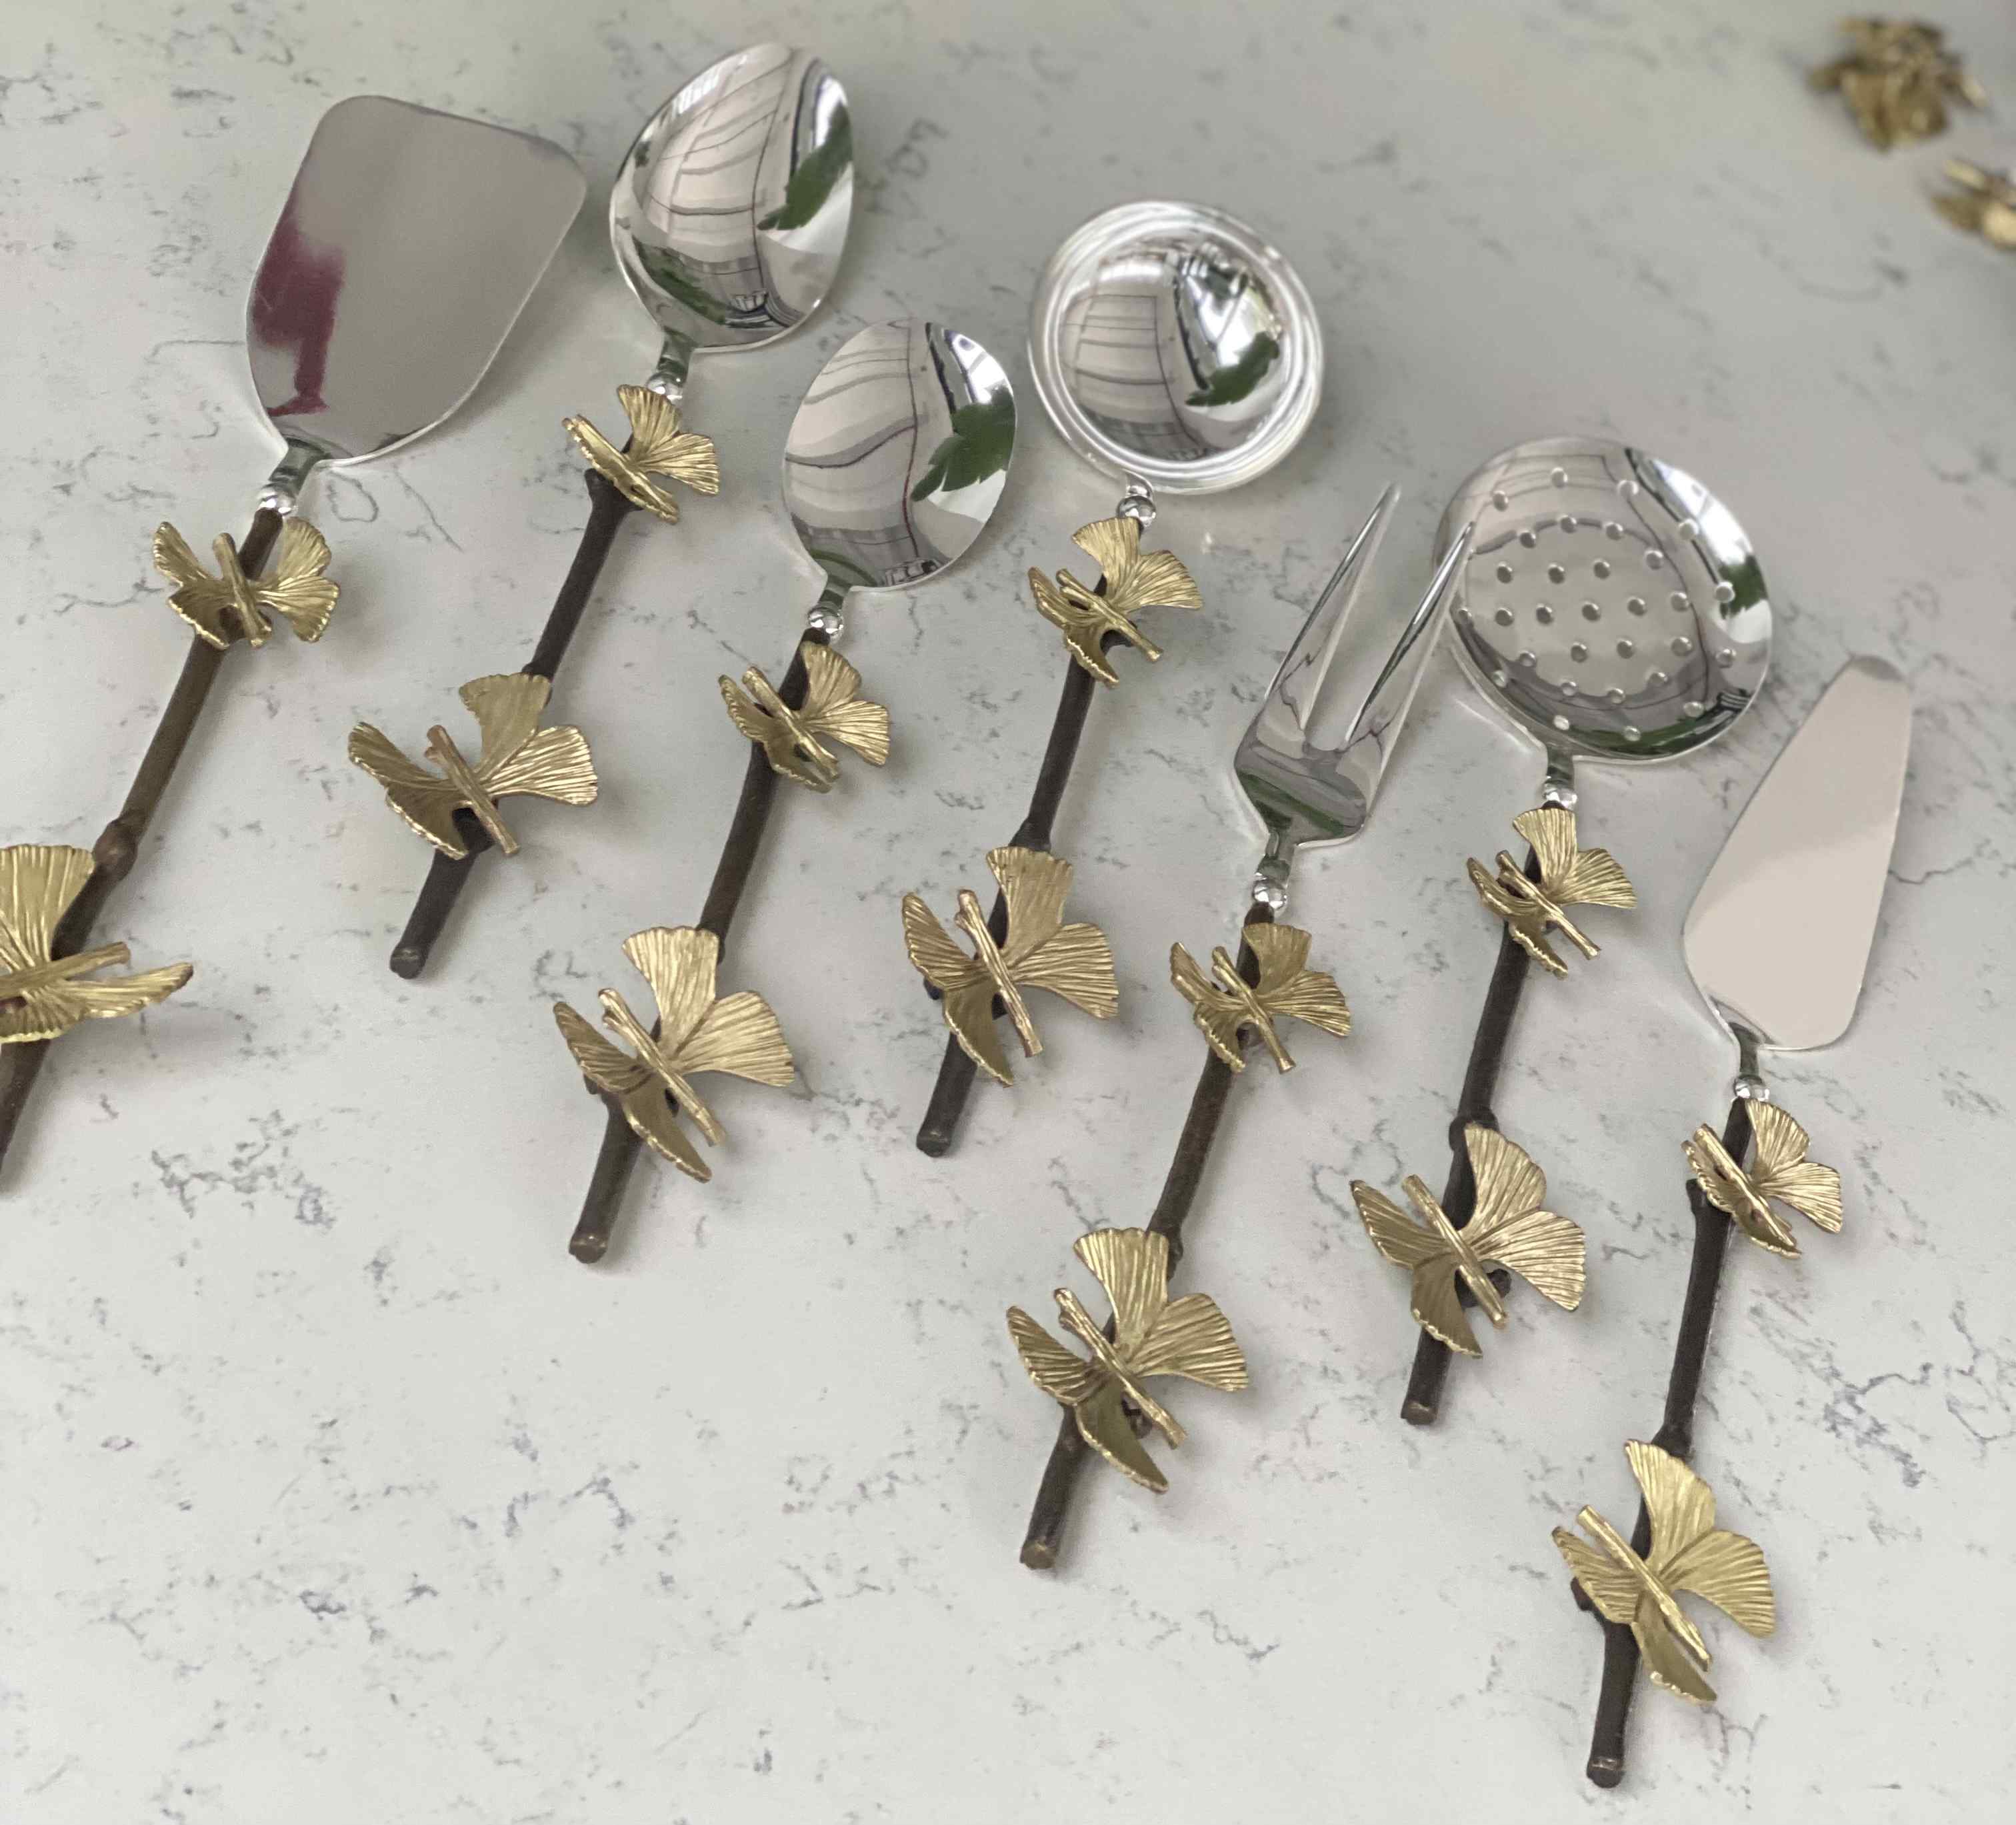 BUTTERFLY DECOR 7PCS SERVING SPOONS